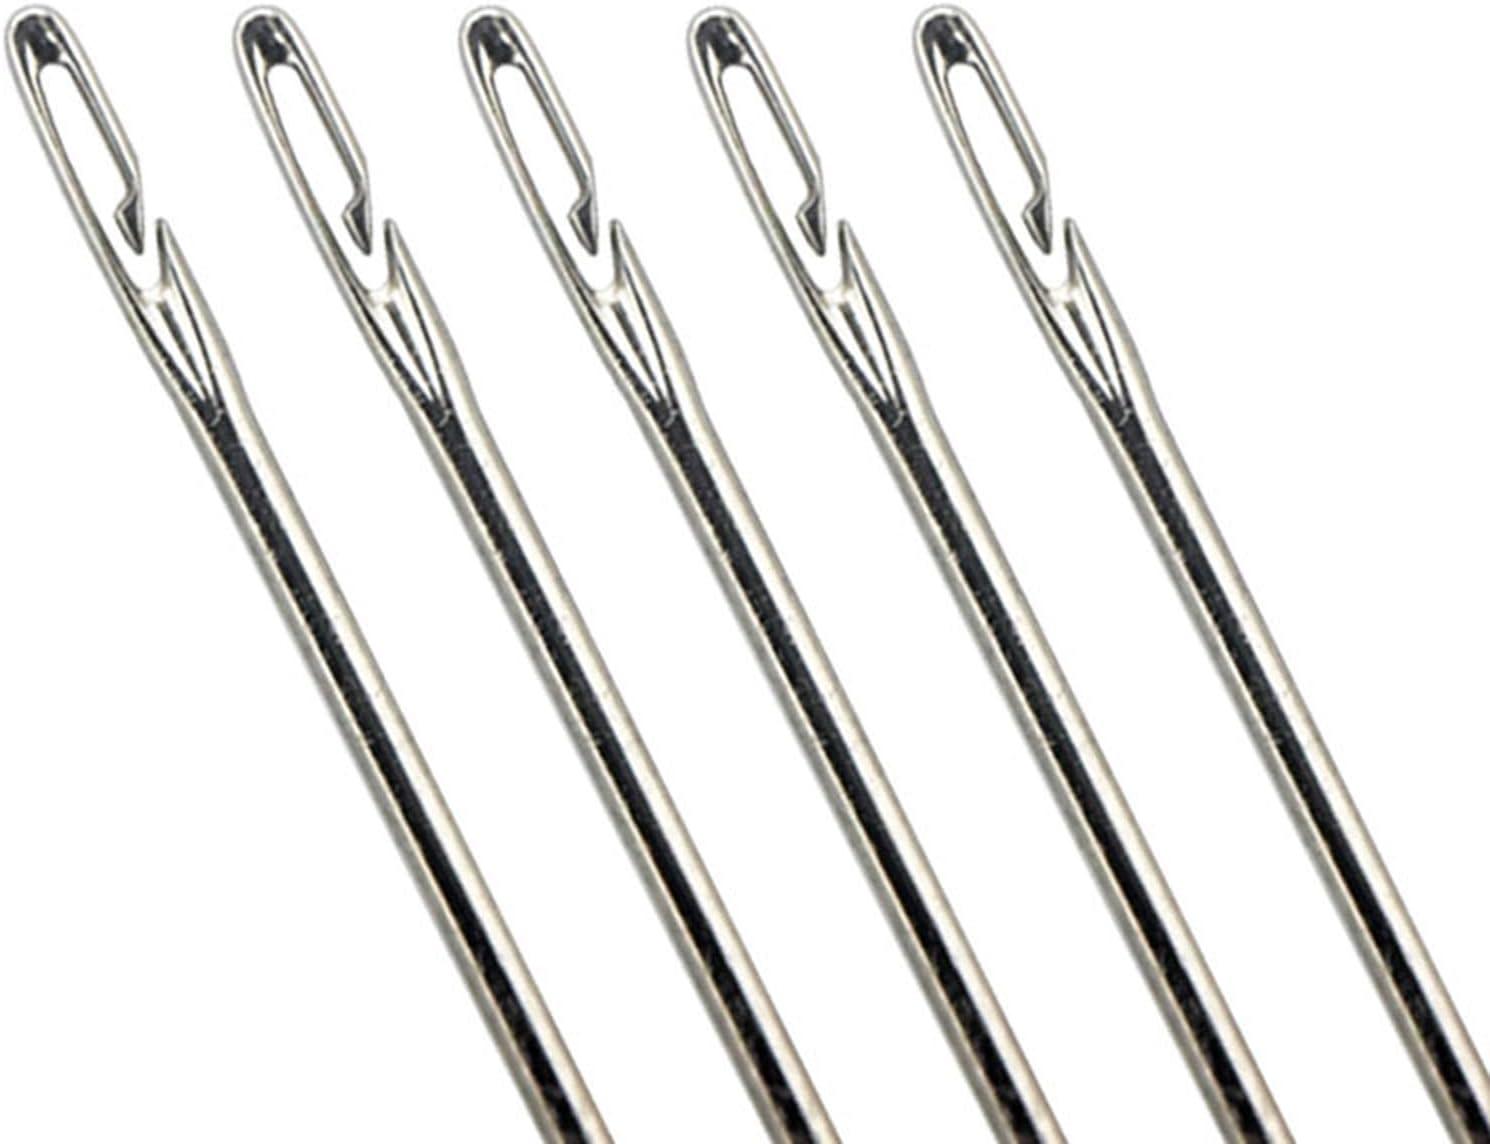 12 PCS STAINLESS Steel Self-threading Needles Opening Sewing